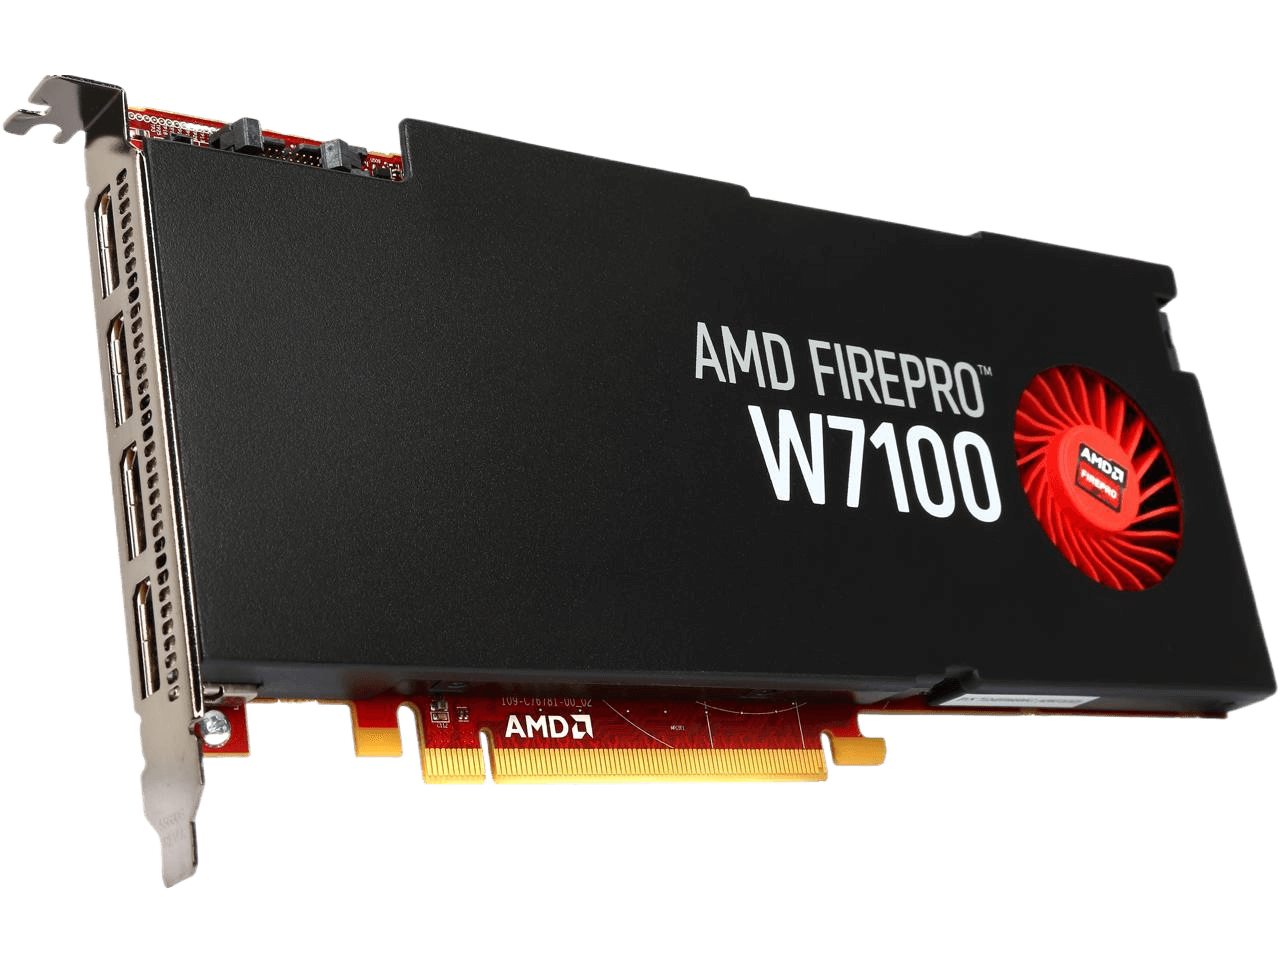 AMD FirePro W7100 8GB 256-bit GDDR5 PCI Express 3.0 x16 CrossFire Supported Full height/full length Workstation Graphics Cards 100-505975